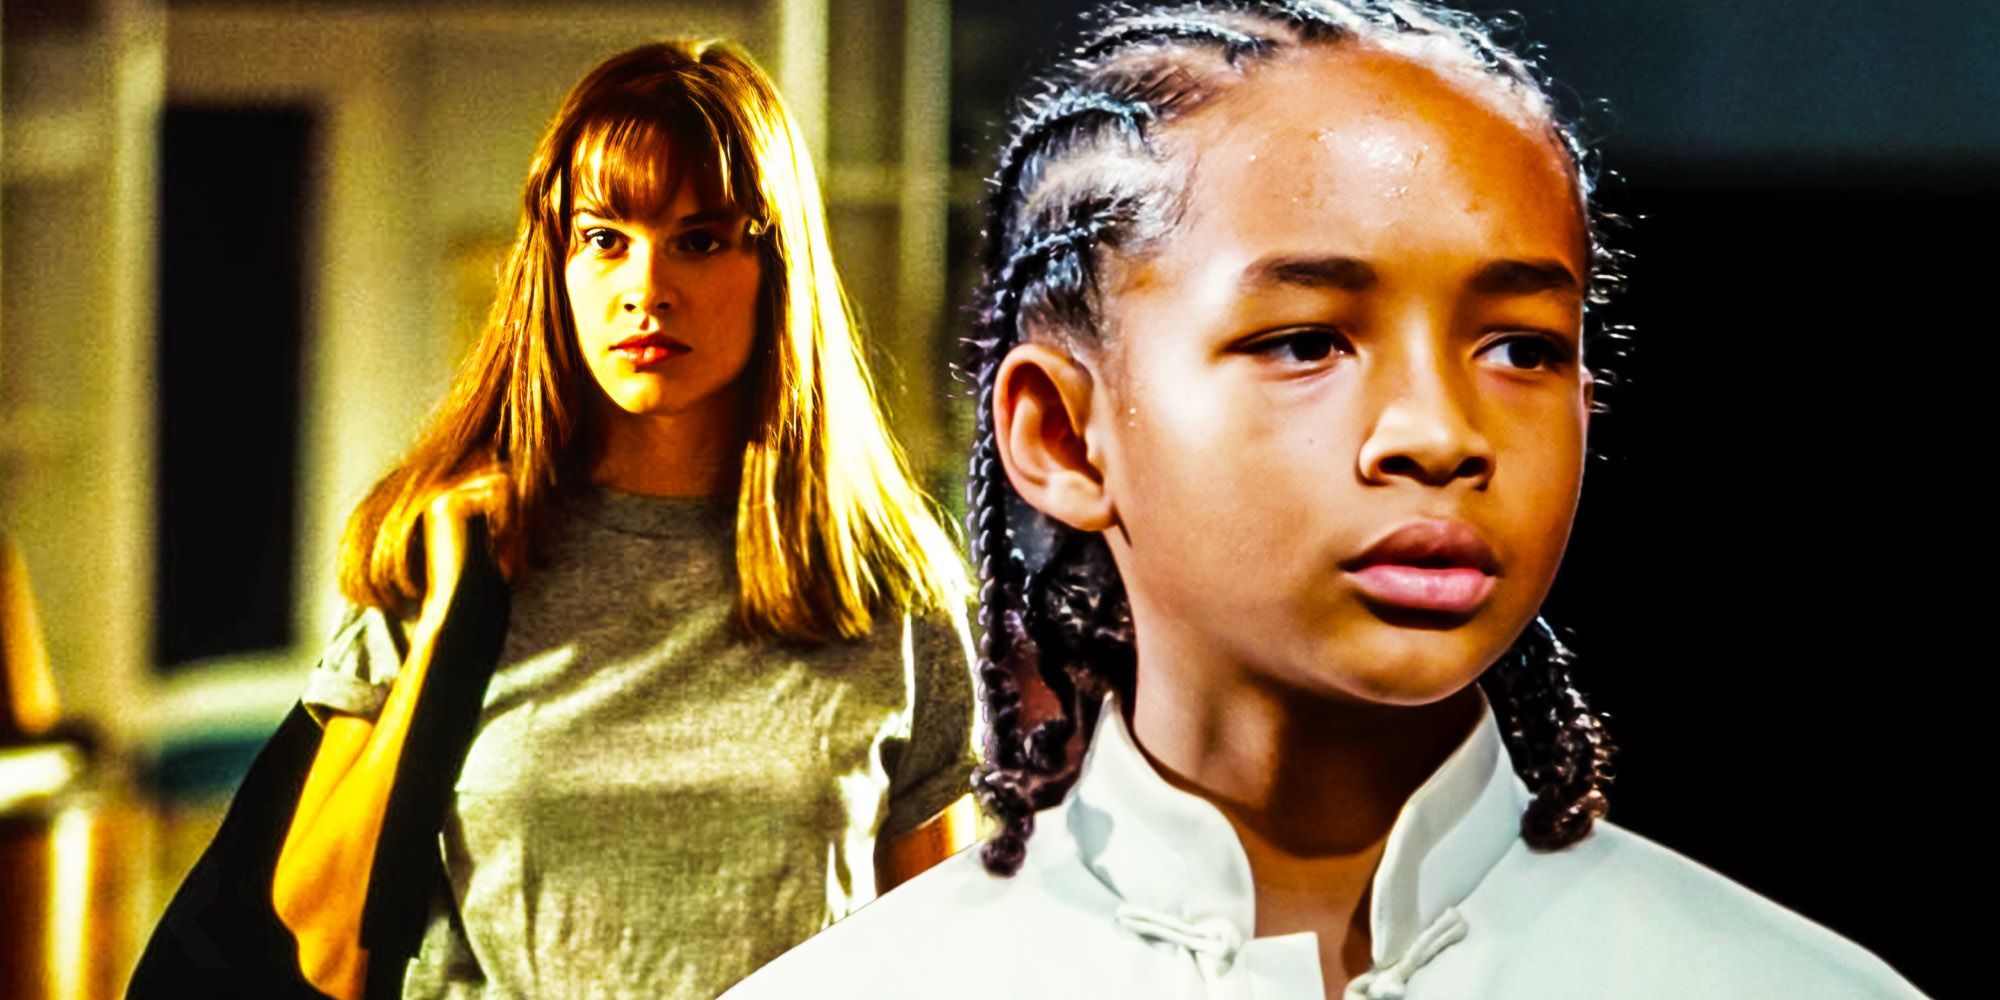 A blended image features Hilary Swank and Jaden Smith in their respective Karate Kid movies